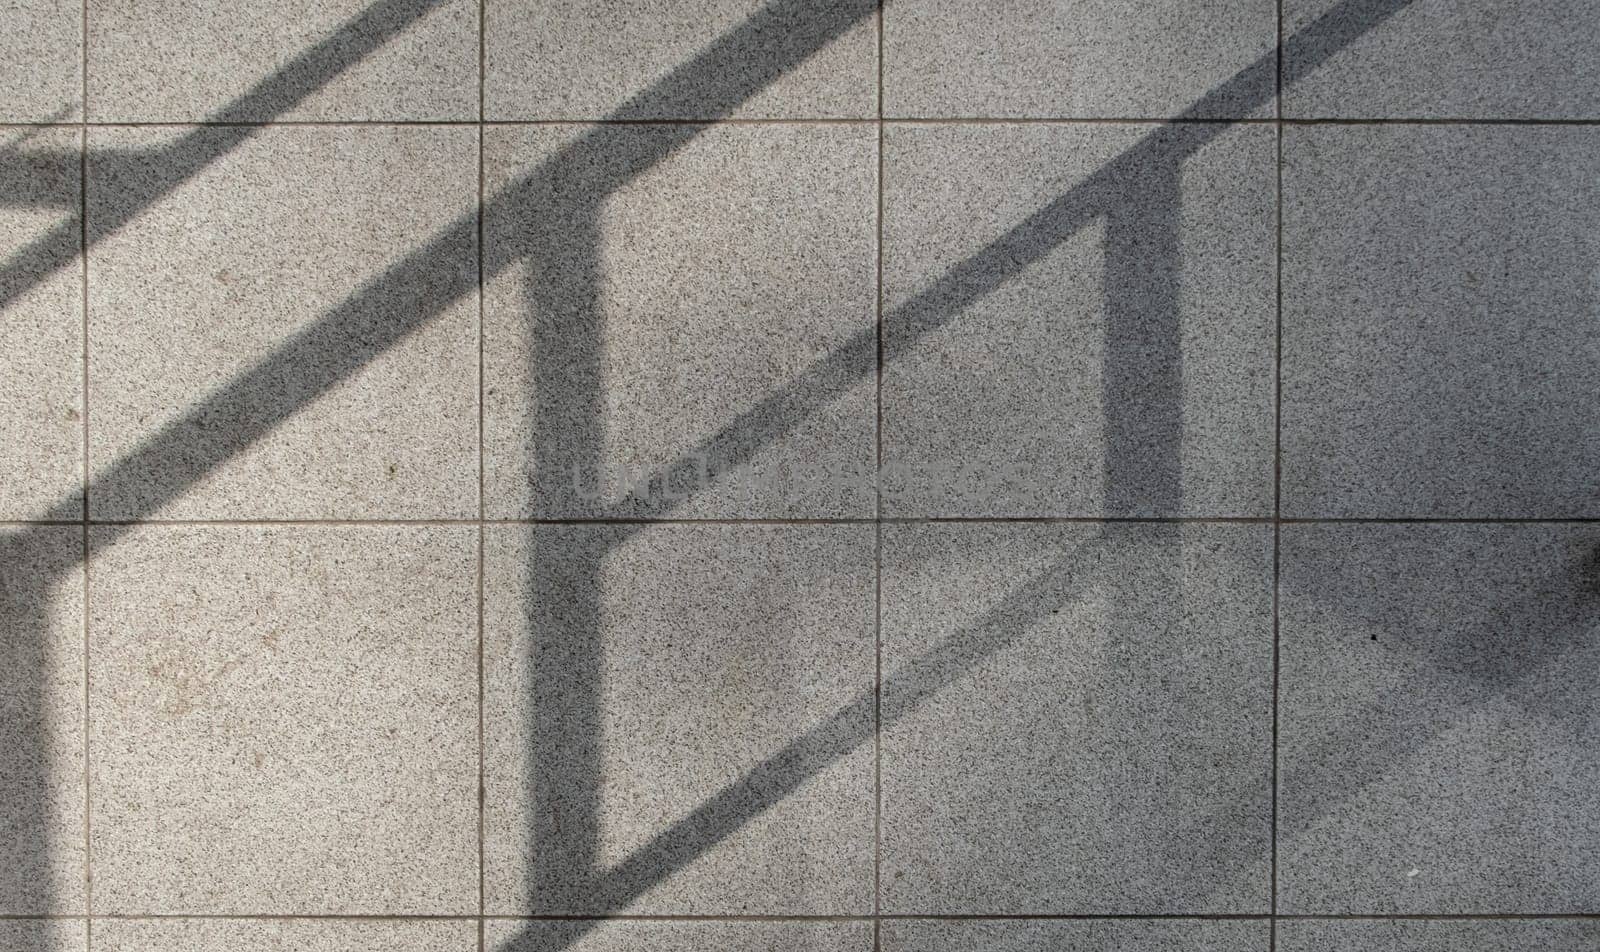 shadows on the ground. abstract texture pattern by igor010